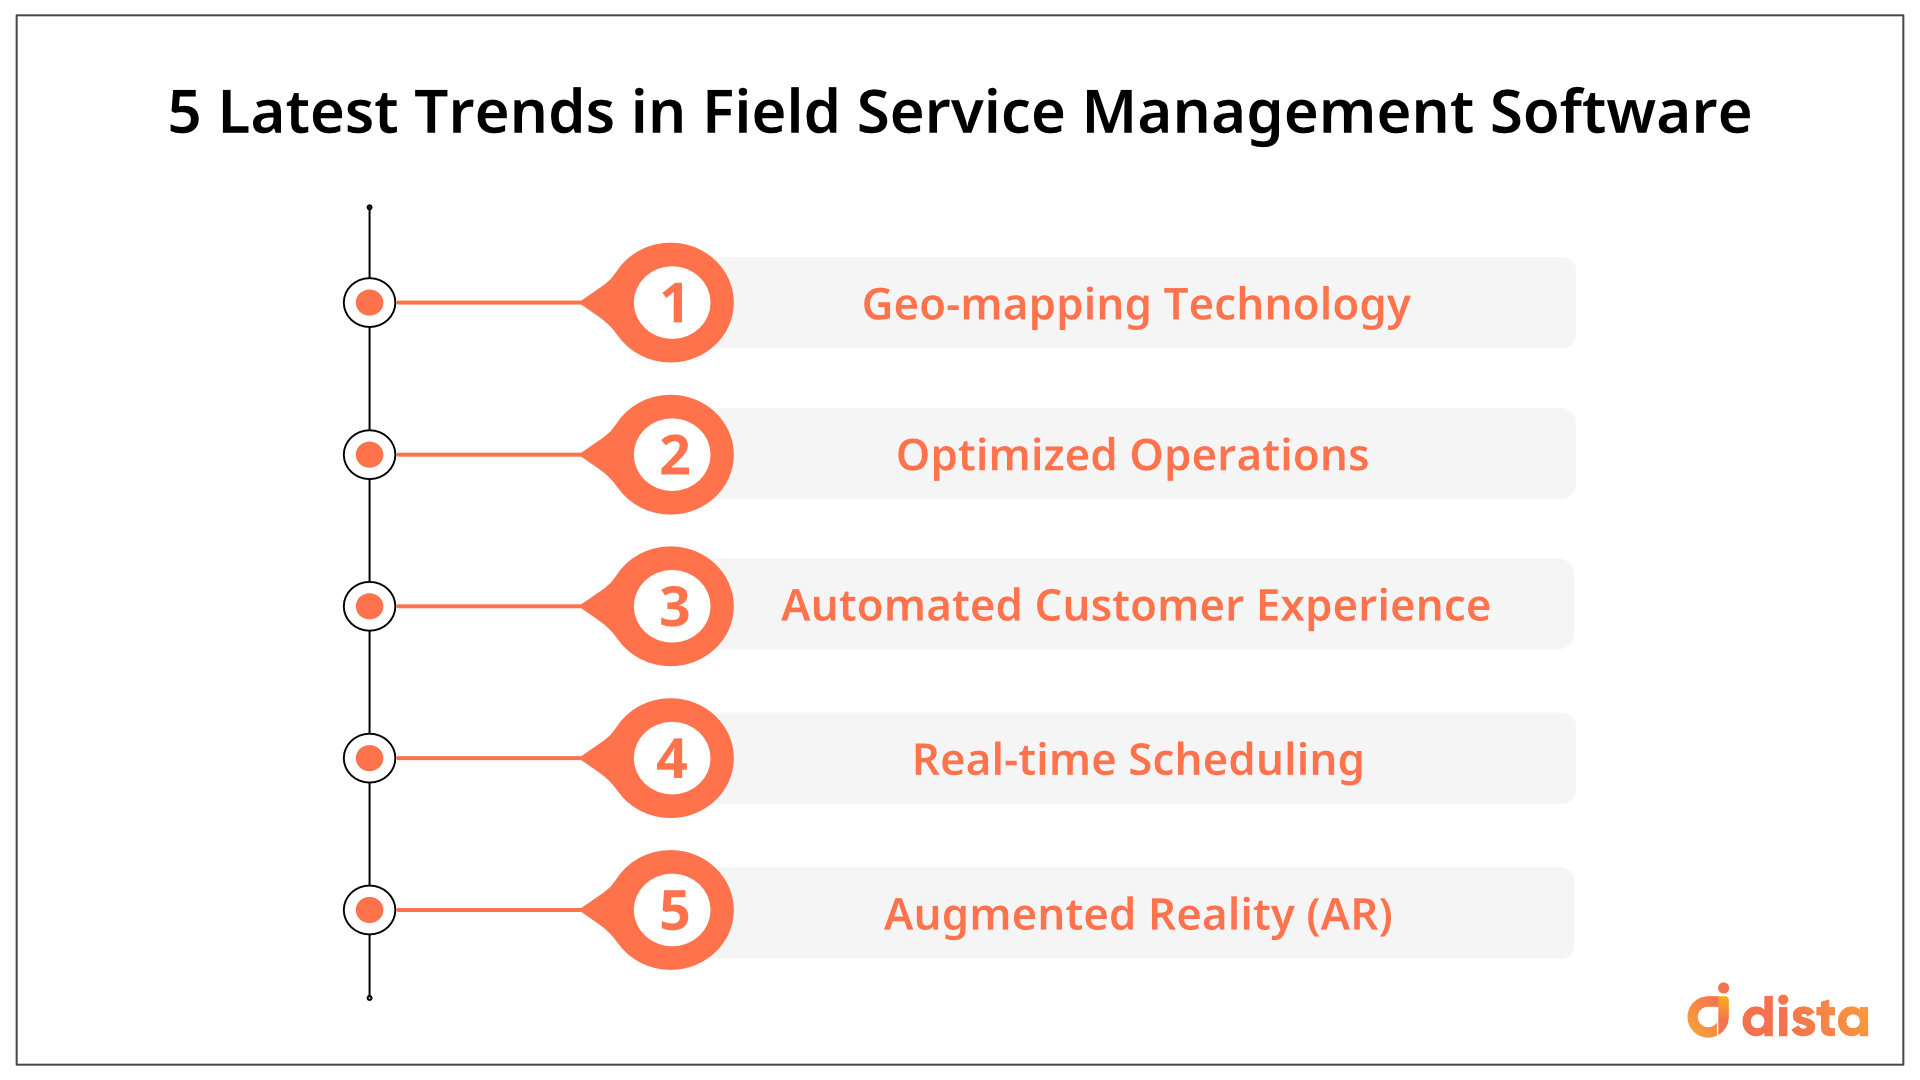 5 Latest Trends in Field Service Management Software